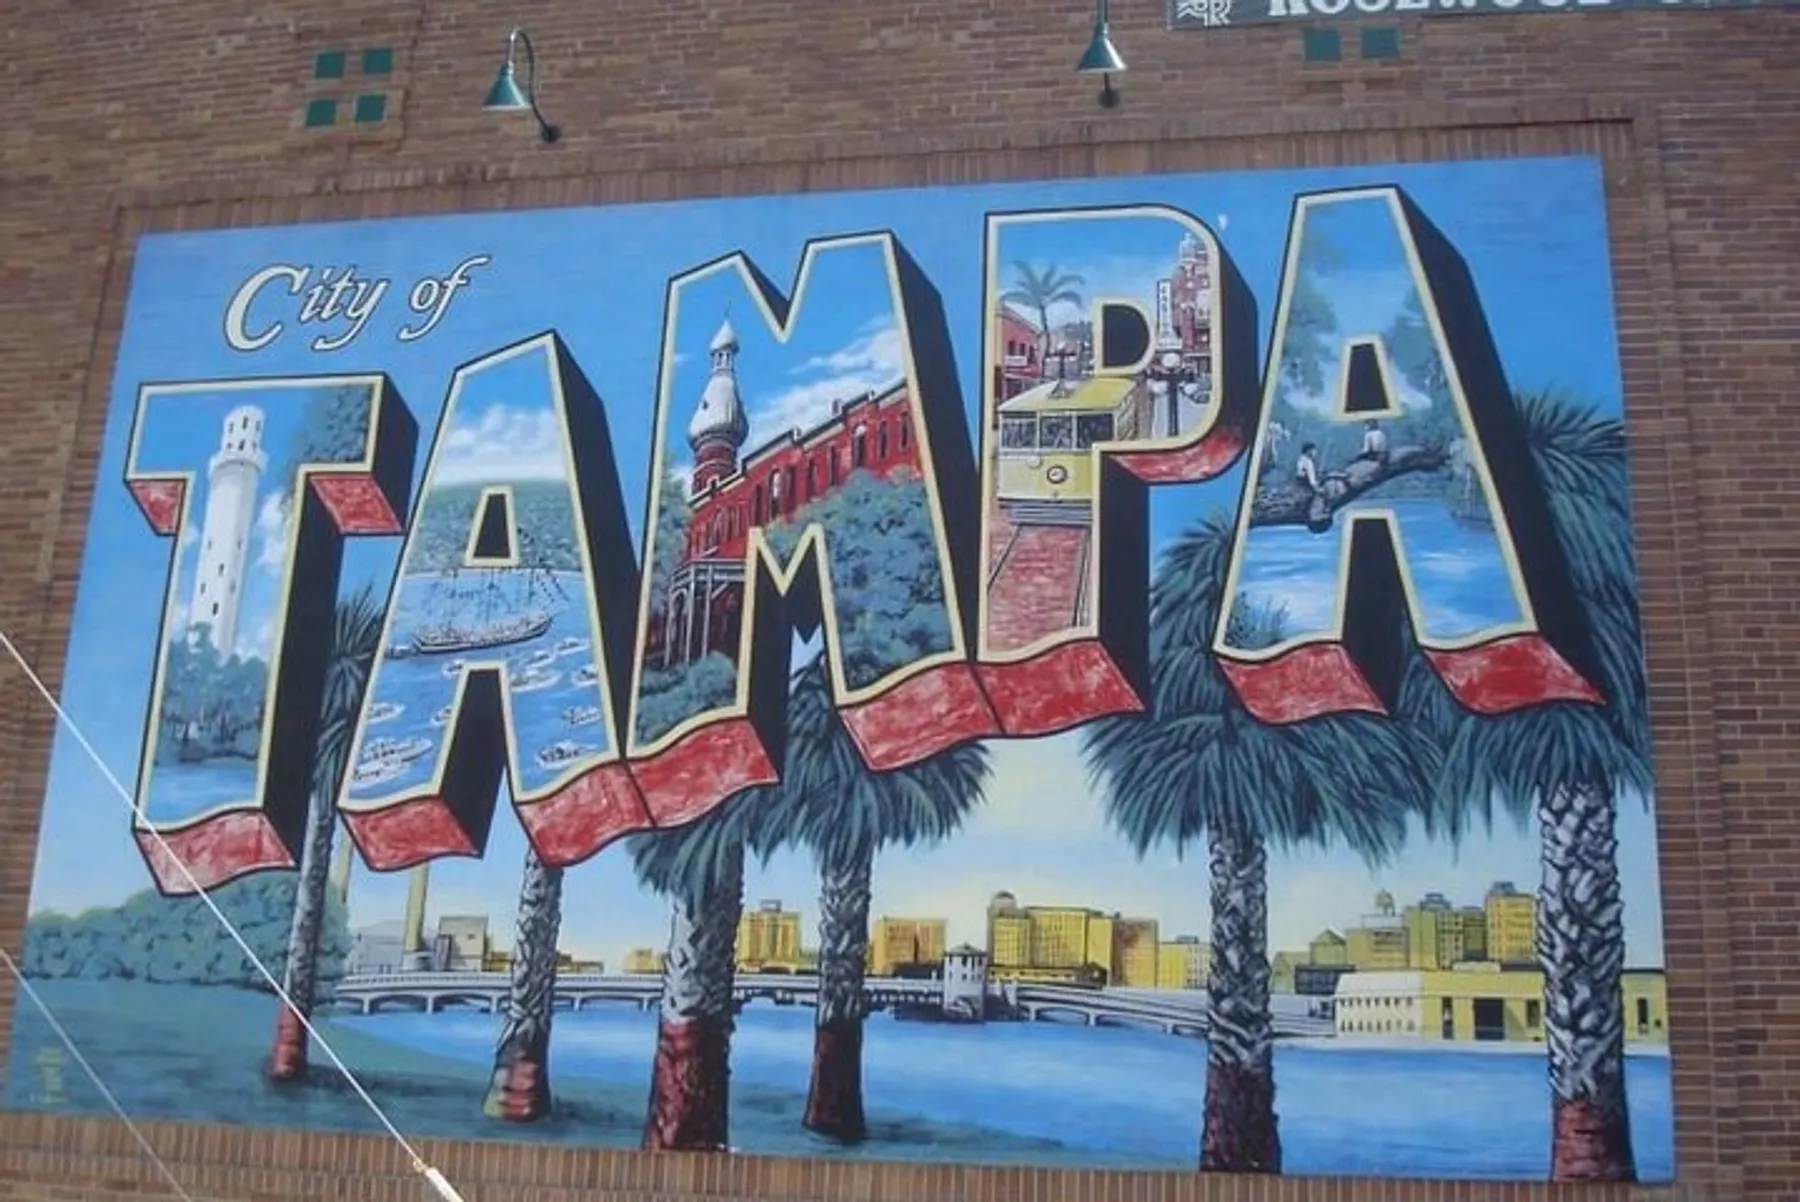 The image showcases a colorful mural on a wall with the words City of Tampa flanked by palm trees, depicting iconic scenes and landmarks within each letter.